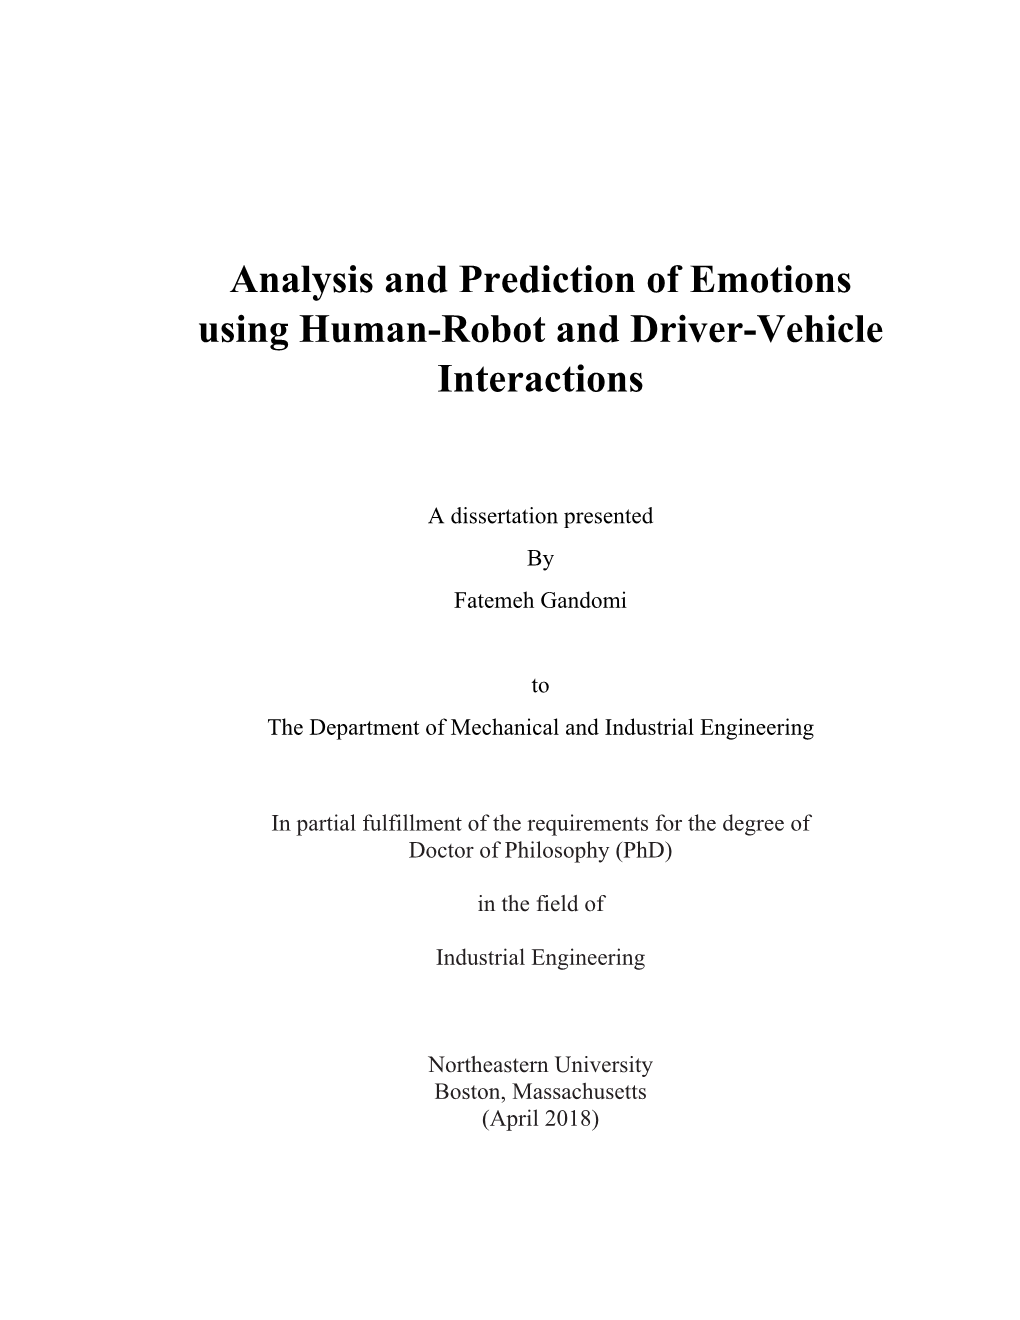 Analysis and Prediction of Emotions Using Human-Robot and Driver-Vehicle Interactions